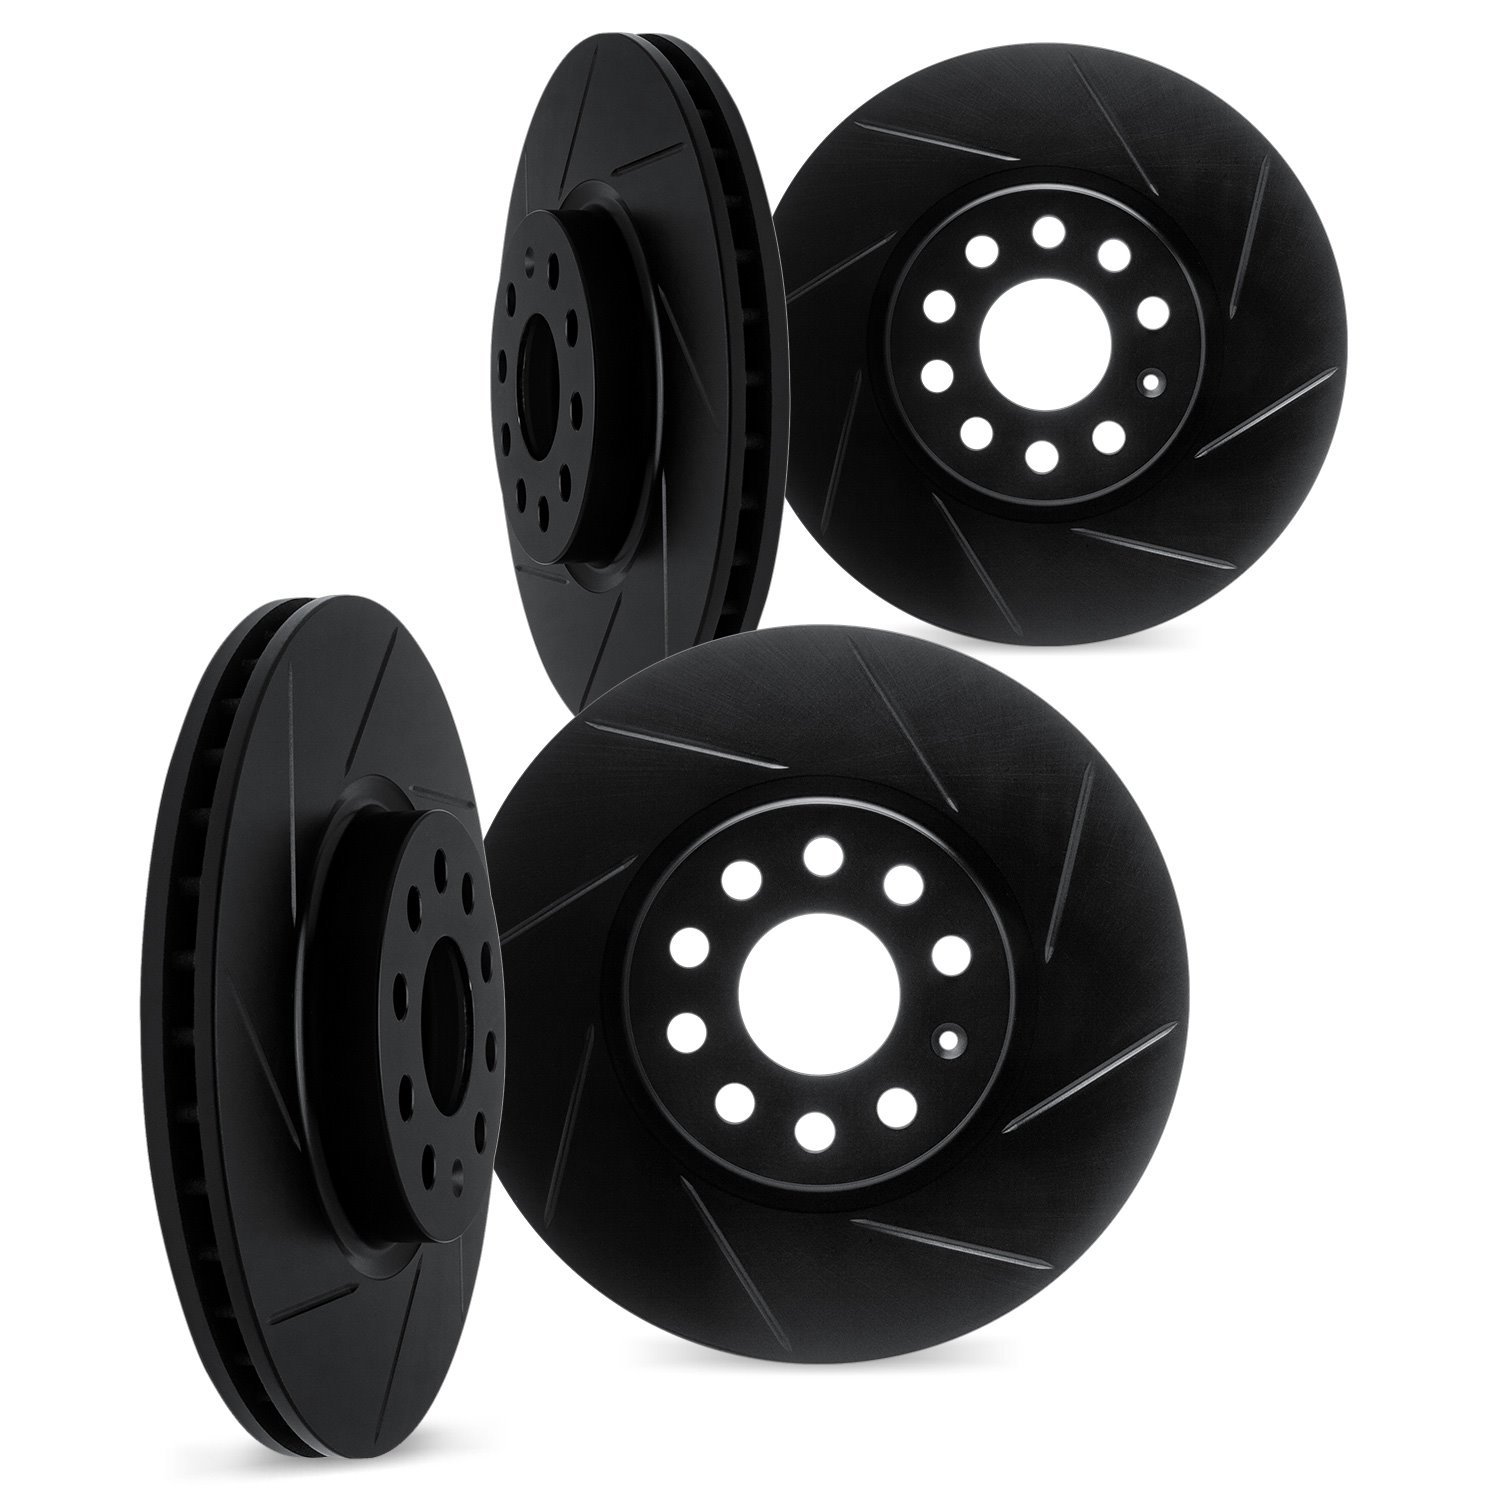 3004-67084 Slotted Brake Rotors [Black], Fits Select Multiple Makes/Models, Position: Front and Rear